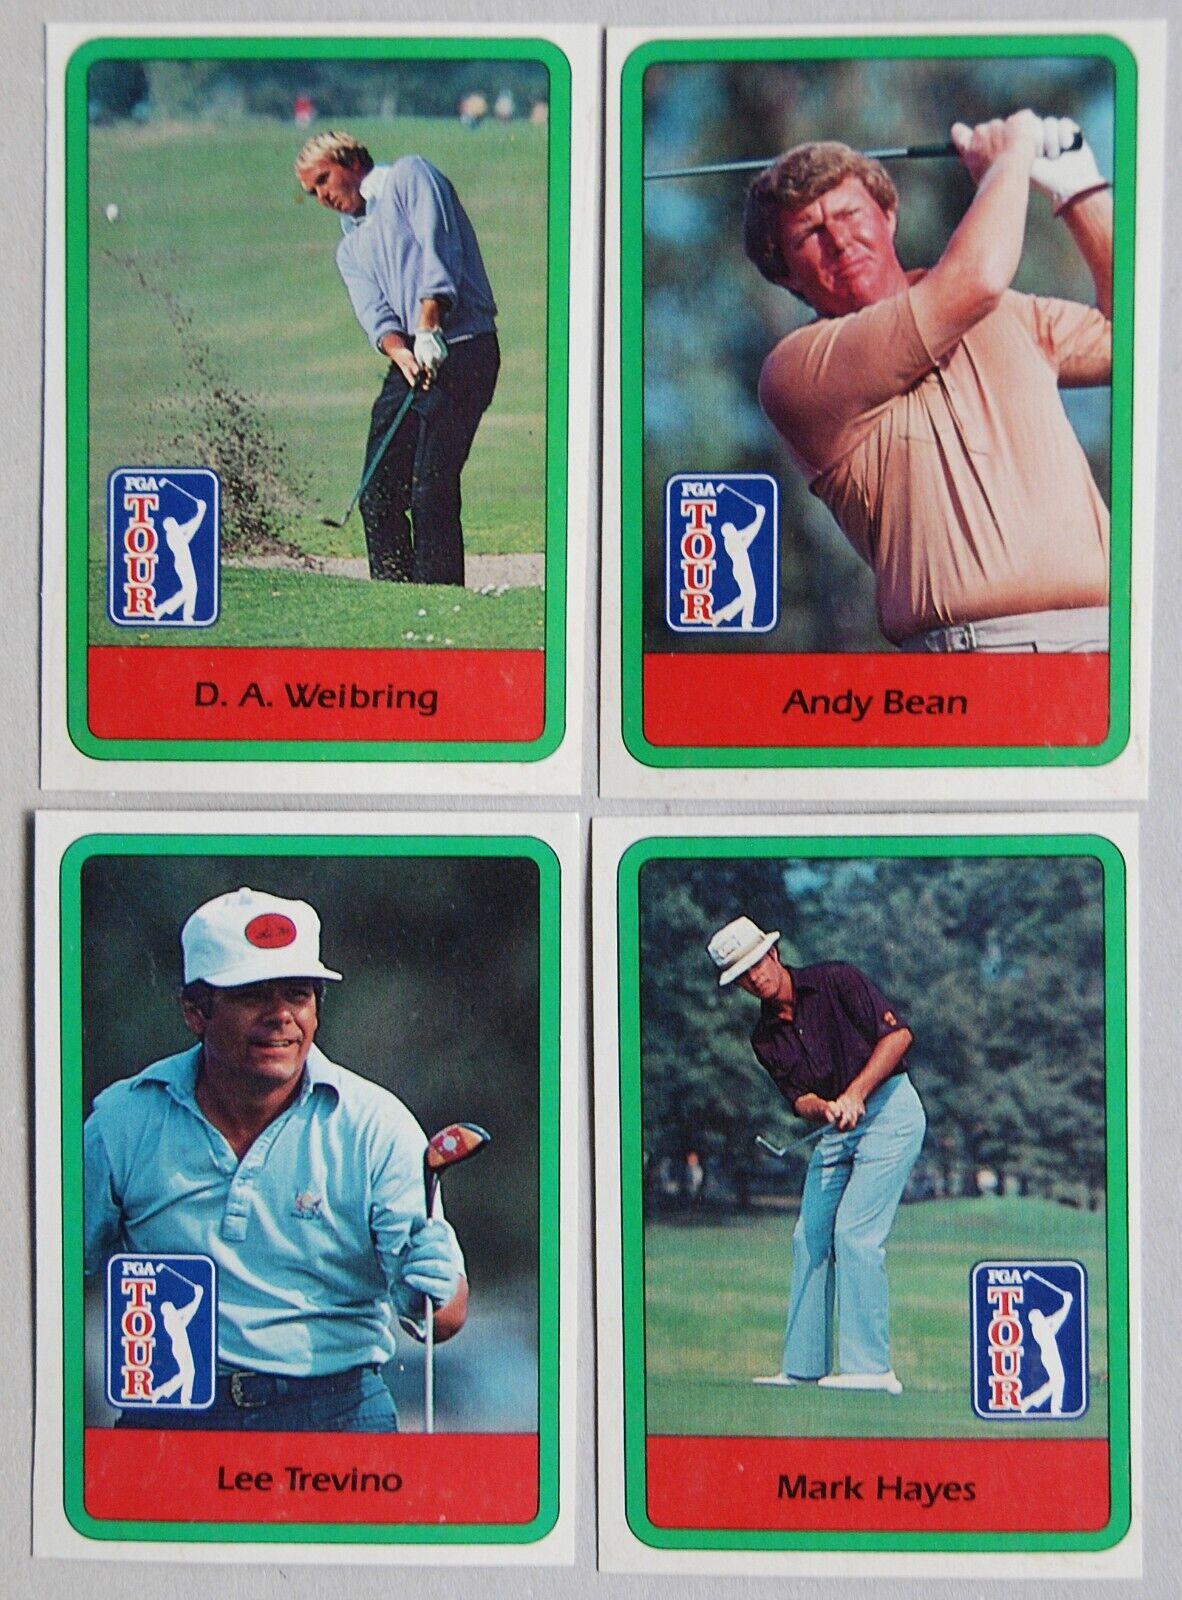 Cartes PGA Tour Golf (TOPPS ?), Weibring Andy Bean Lee Trevino Mark Hayes, 1982